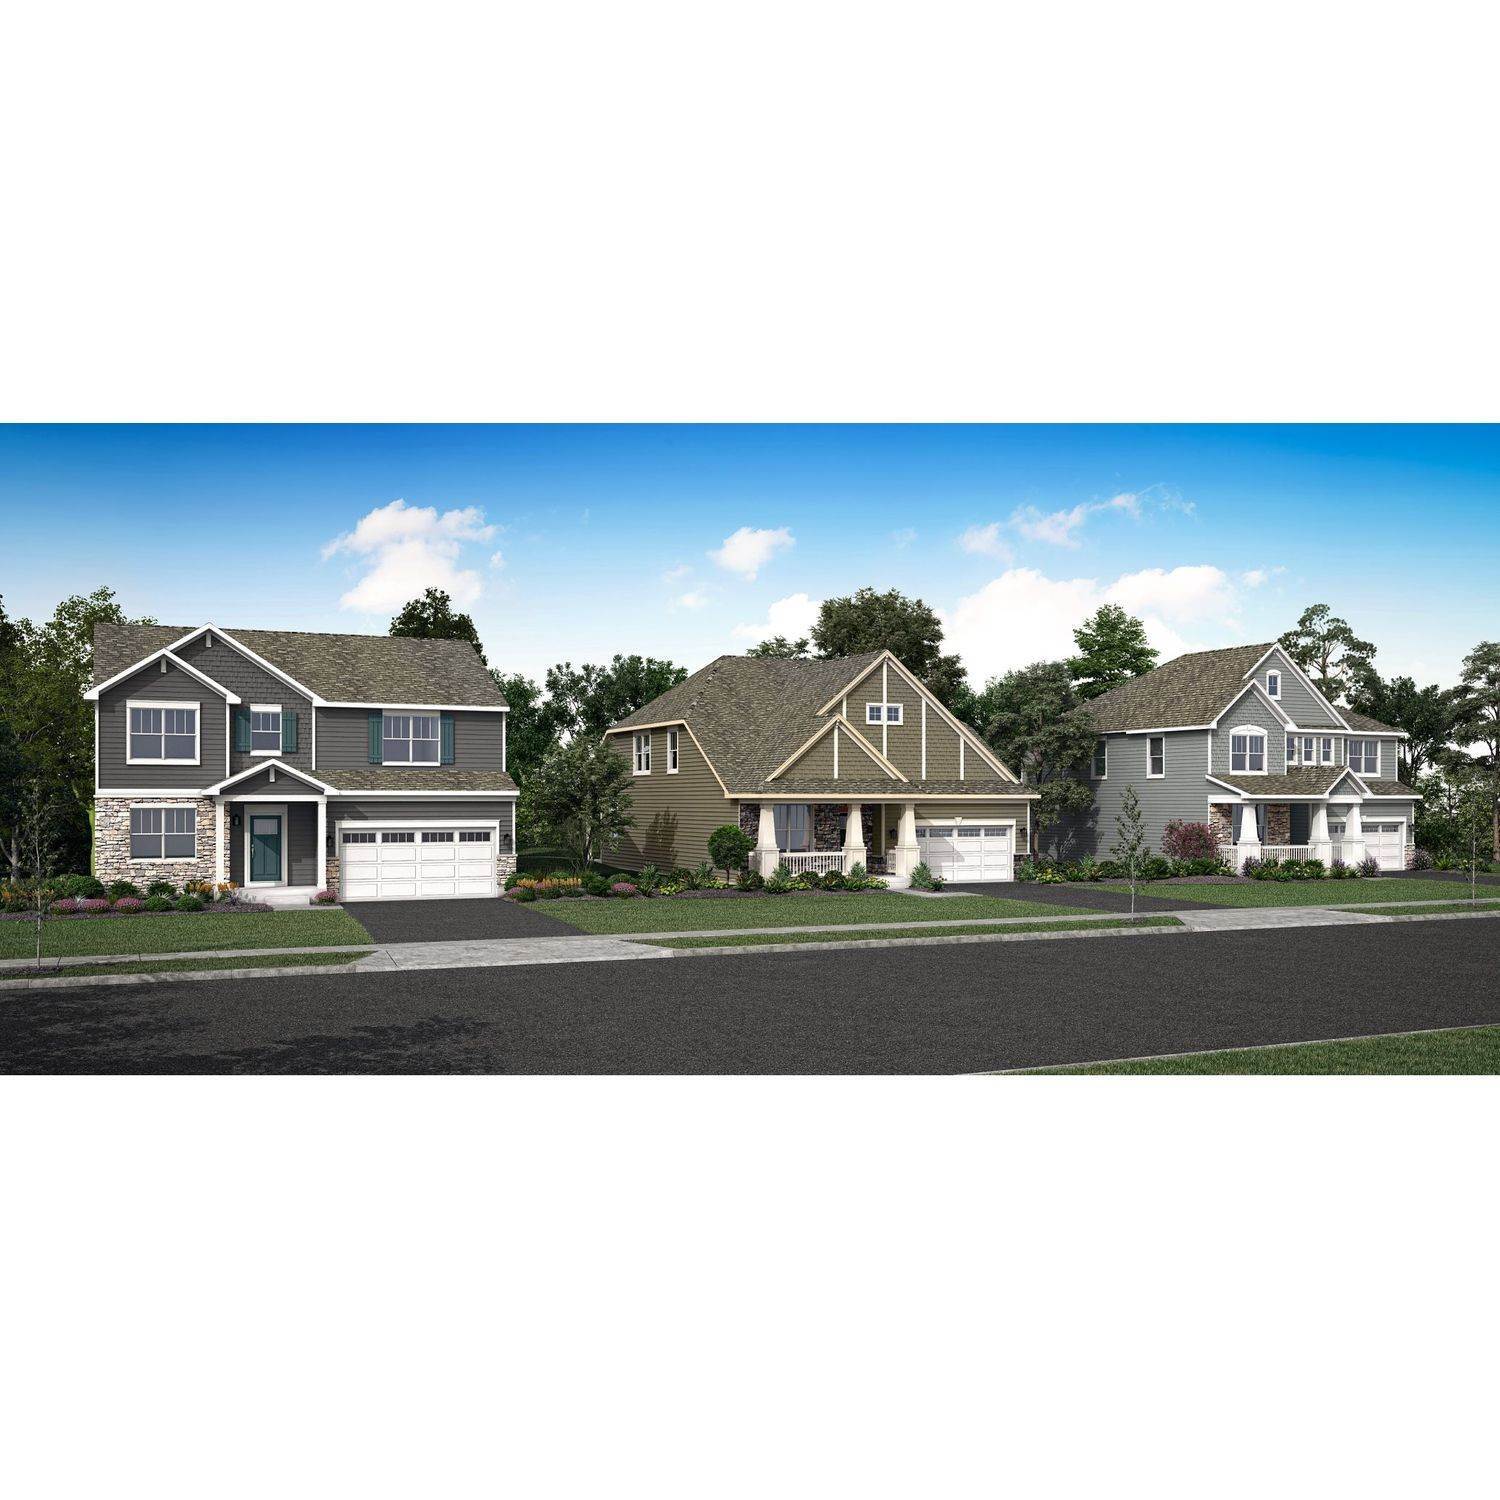 19. Tall Oaks - Horizon Series building at 84 Hedgerow Dr, Elgin, IL 60124